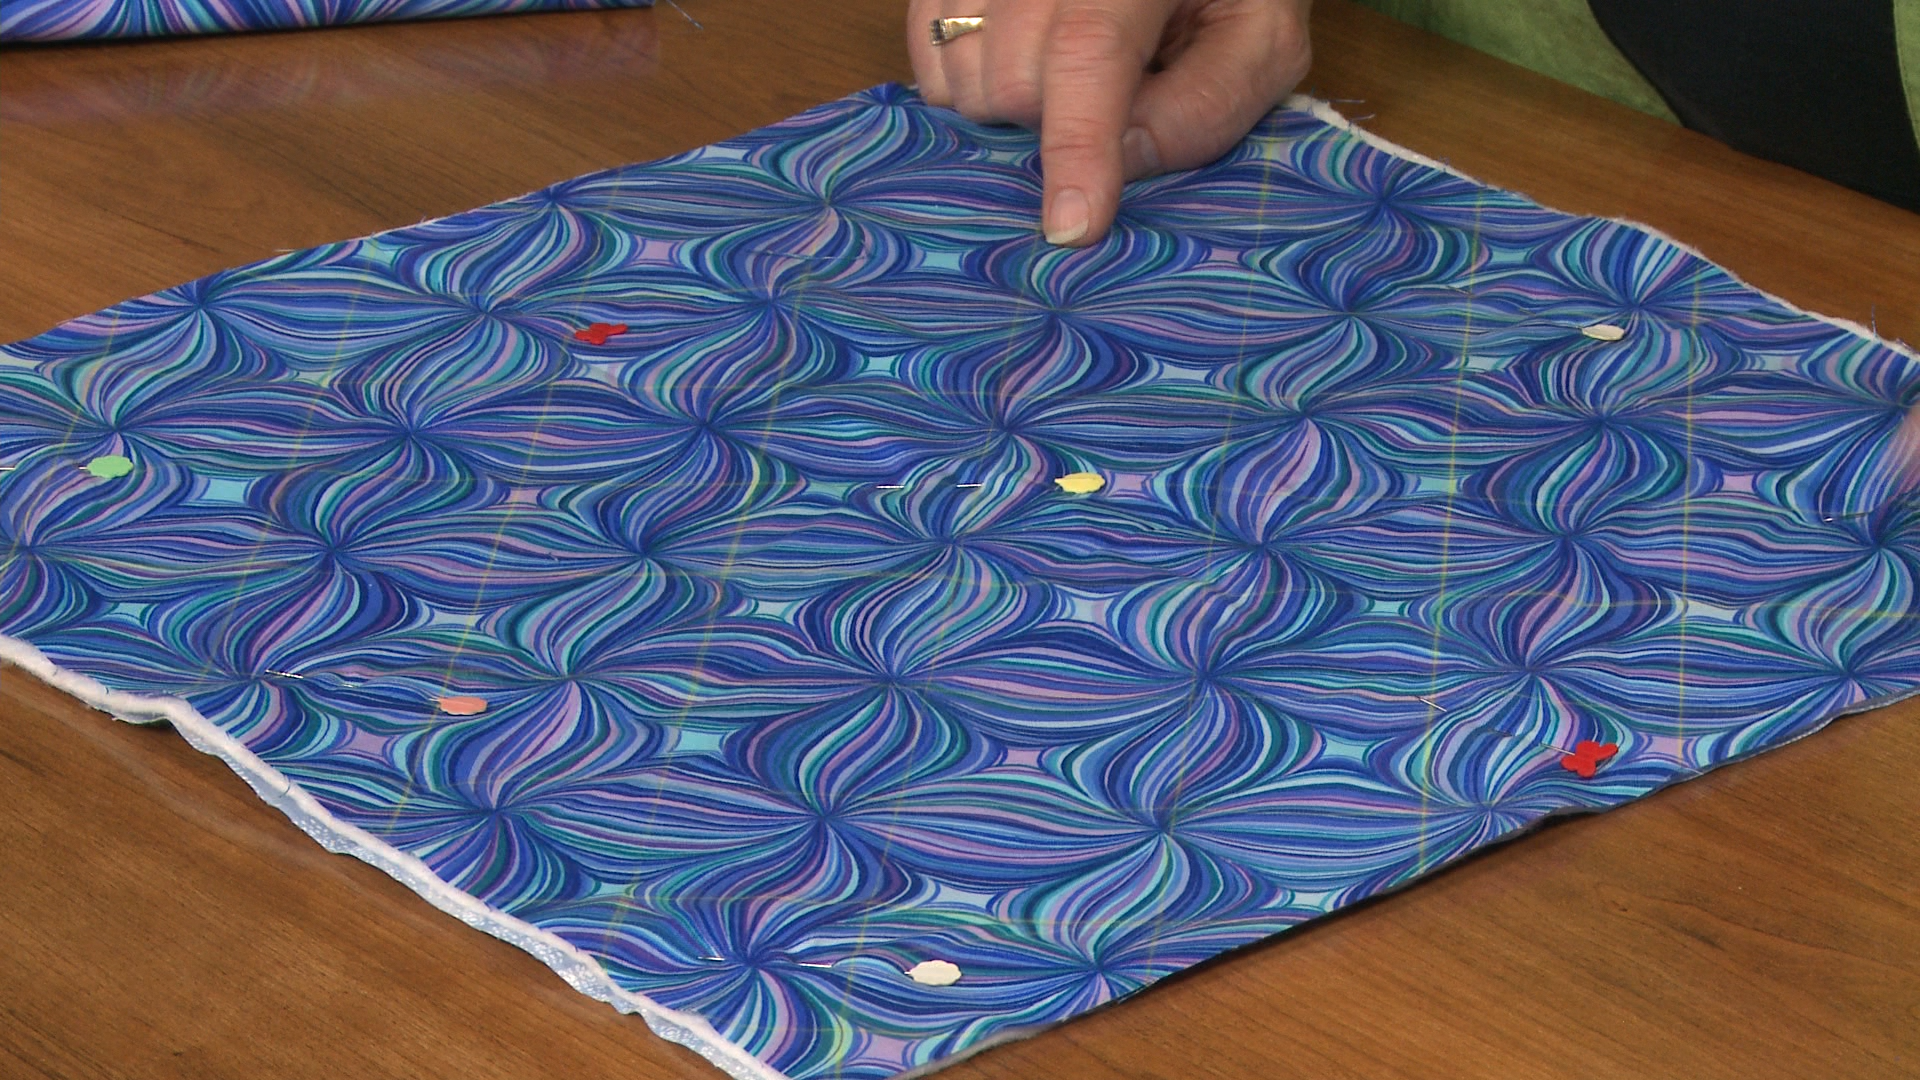 Session 2: What Can I Do with Pre-Quilted Fabric